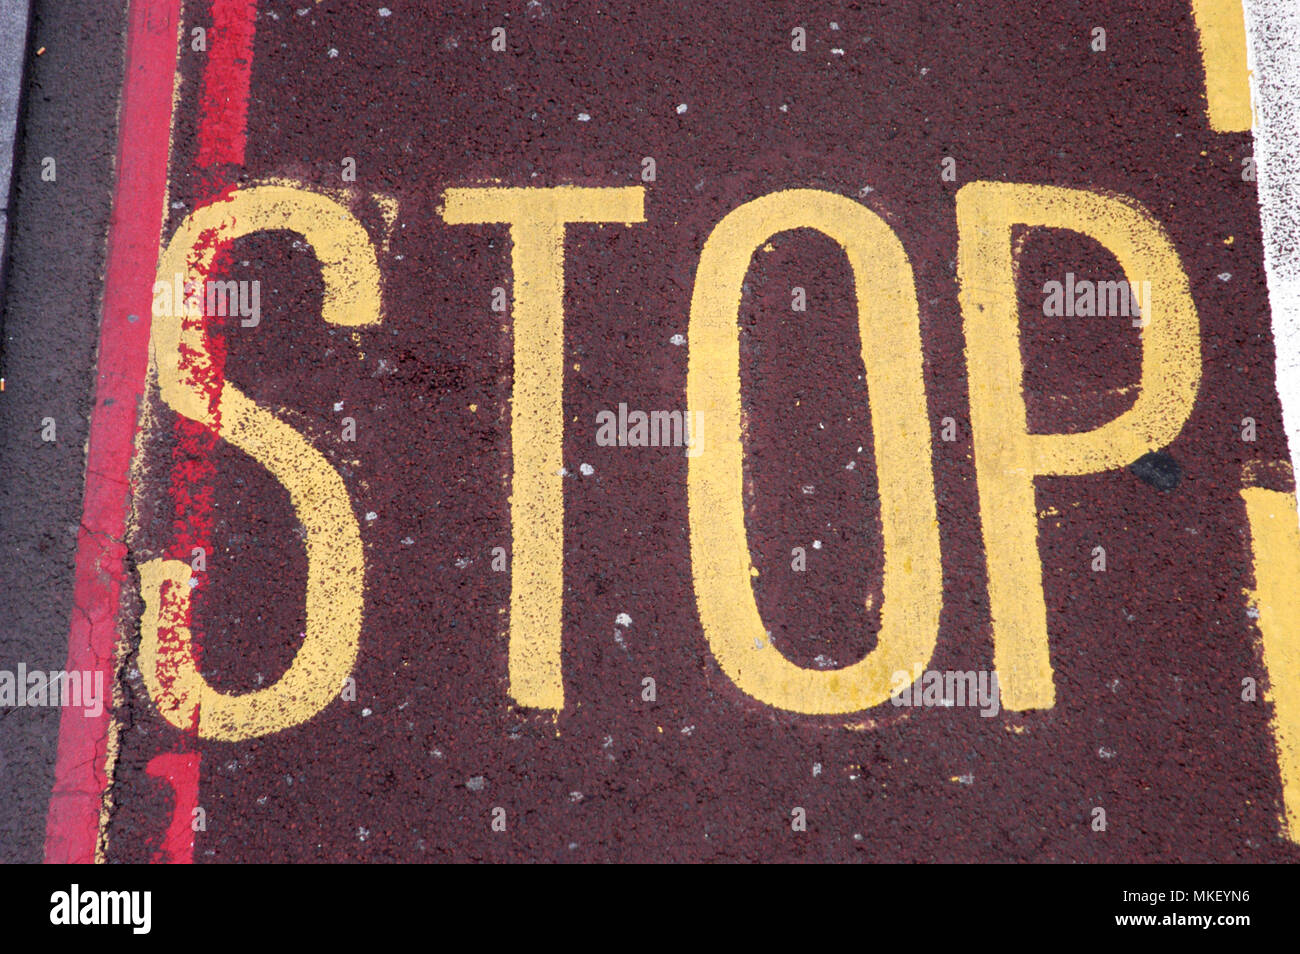 city centre traffic control zones stop sign in yellow with red lines on red tarmac Stock Photo